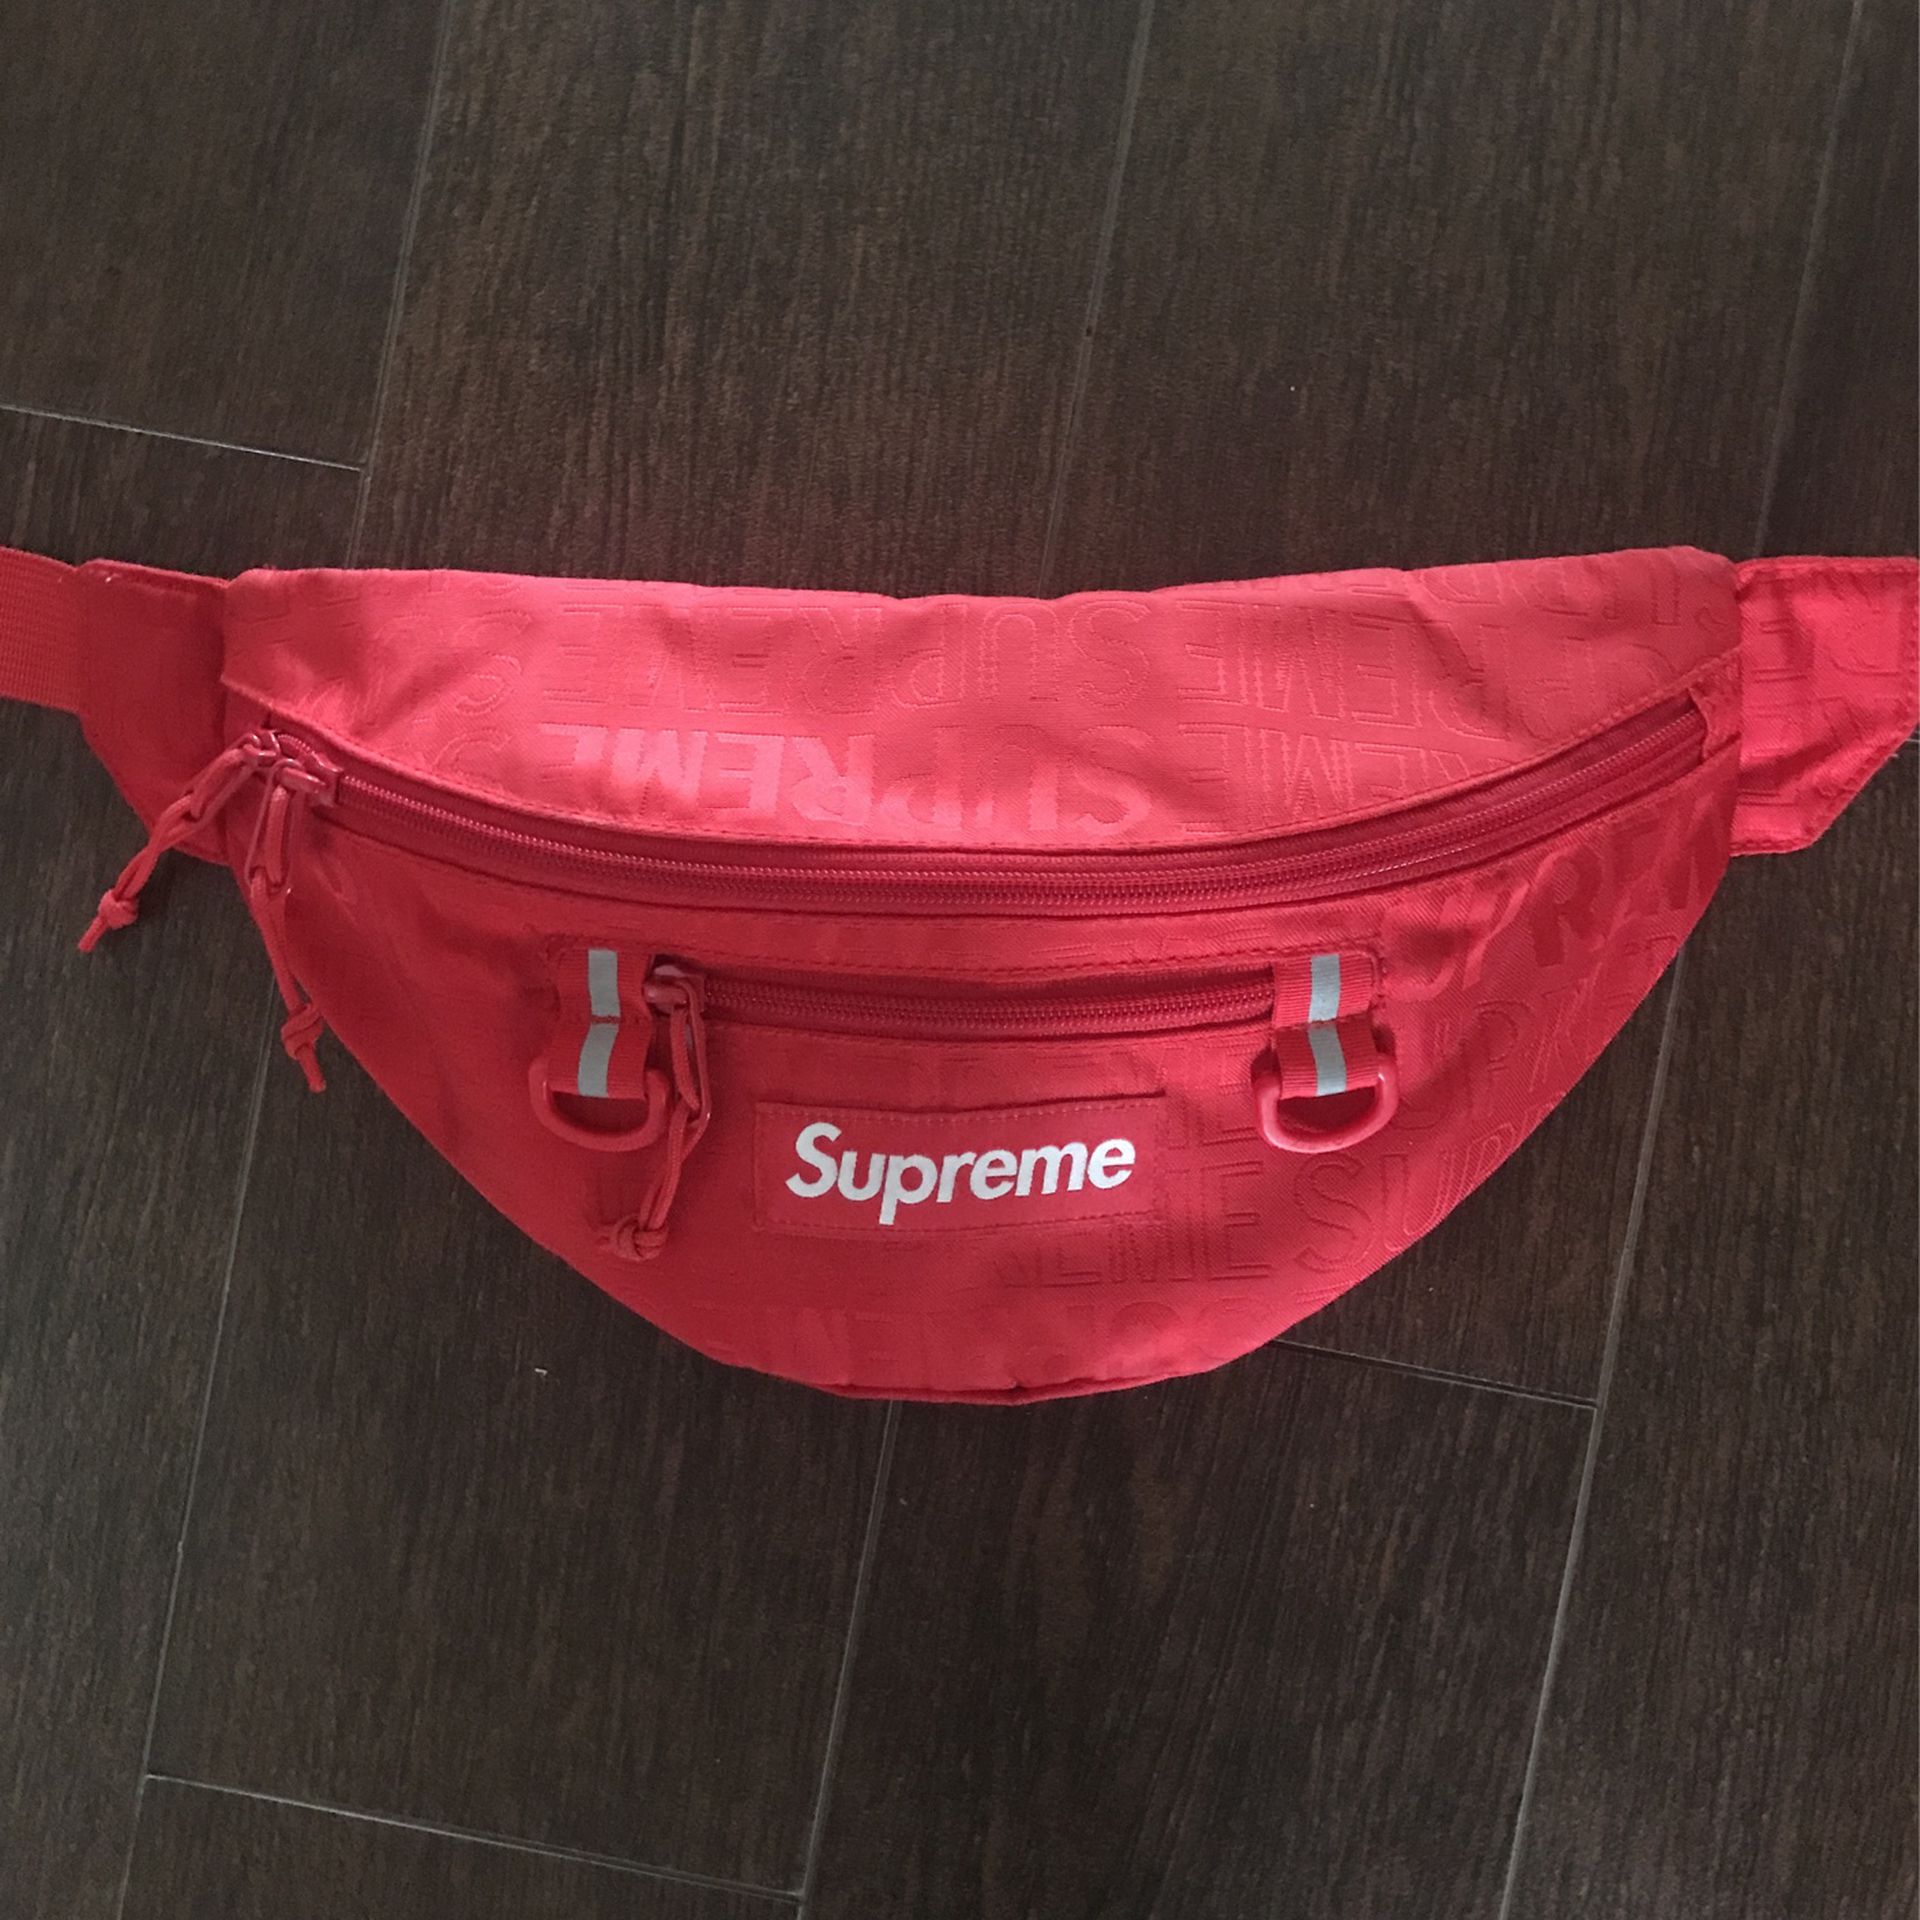 SUPREME SS19 FANNY PACK